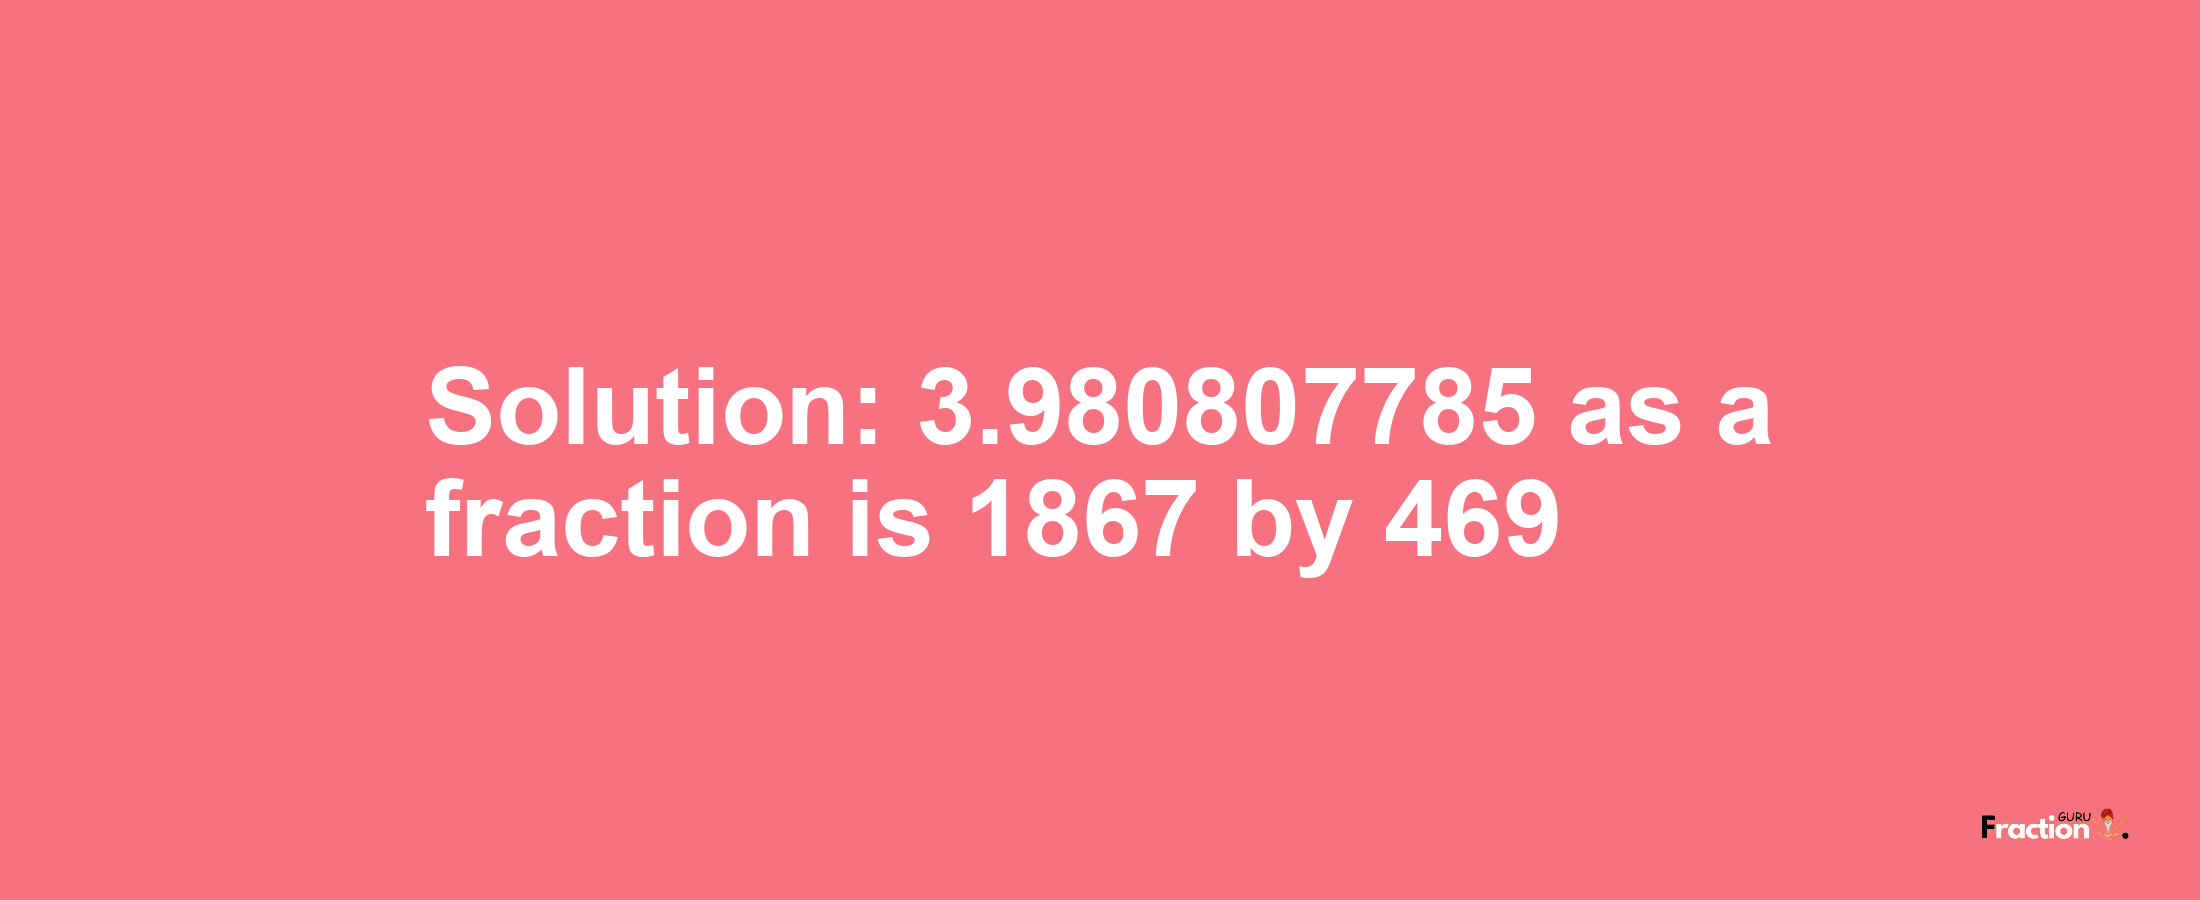 Solution:3.980807785 as a fraction is 1867/469